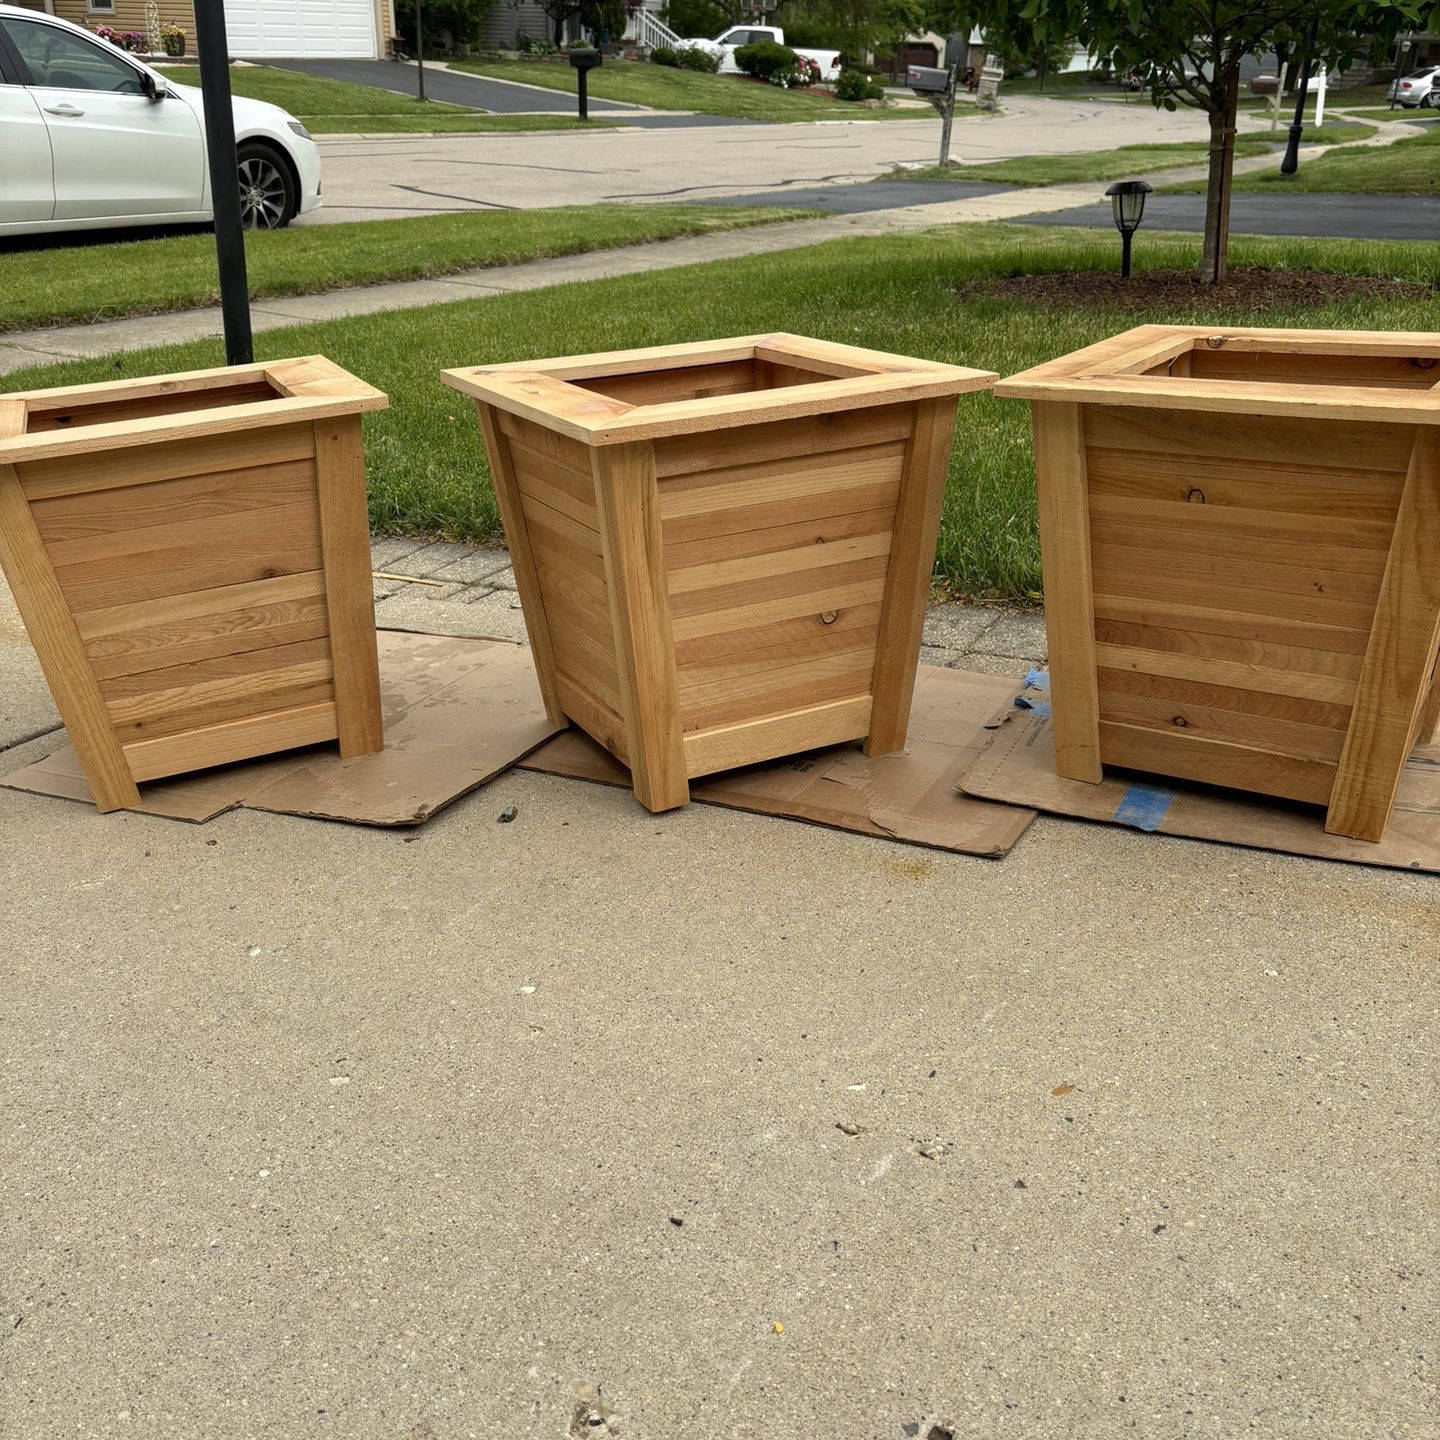 Decorative Cedar Flower Planters For Outdoors Ready For Pickup